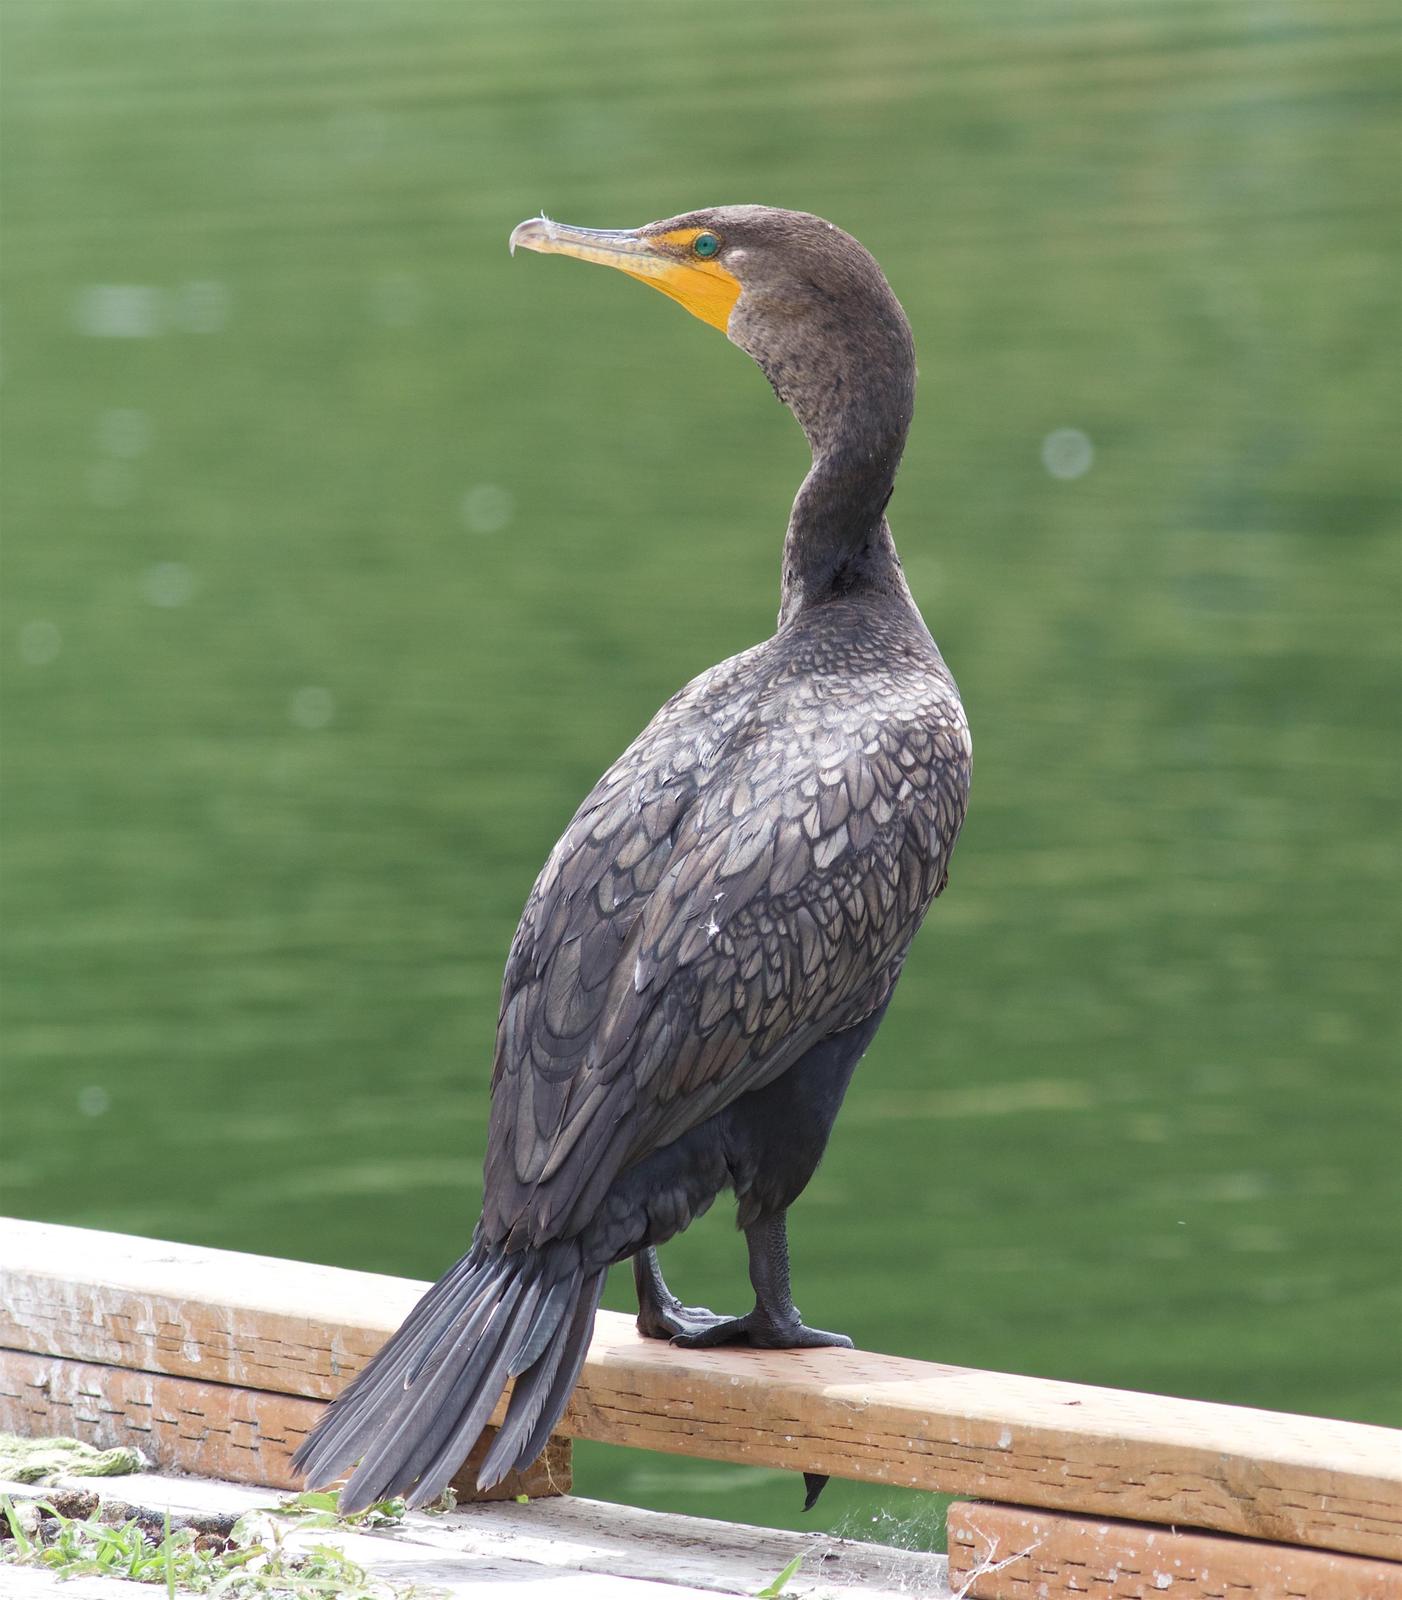 Double-crested Cormorant Photo by Kathryn Keith